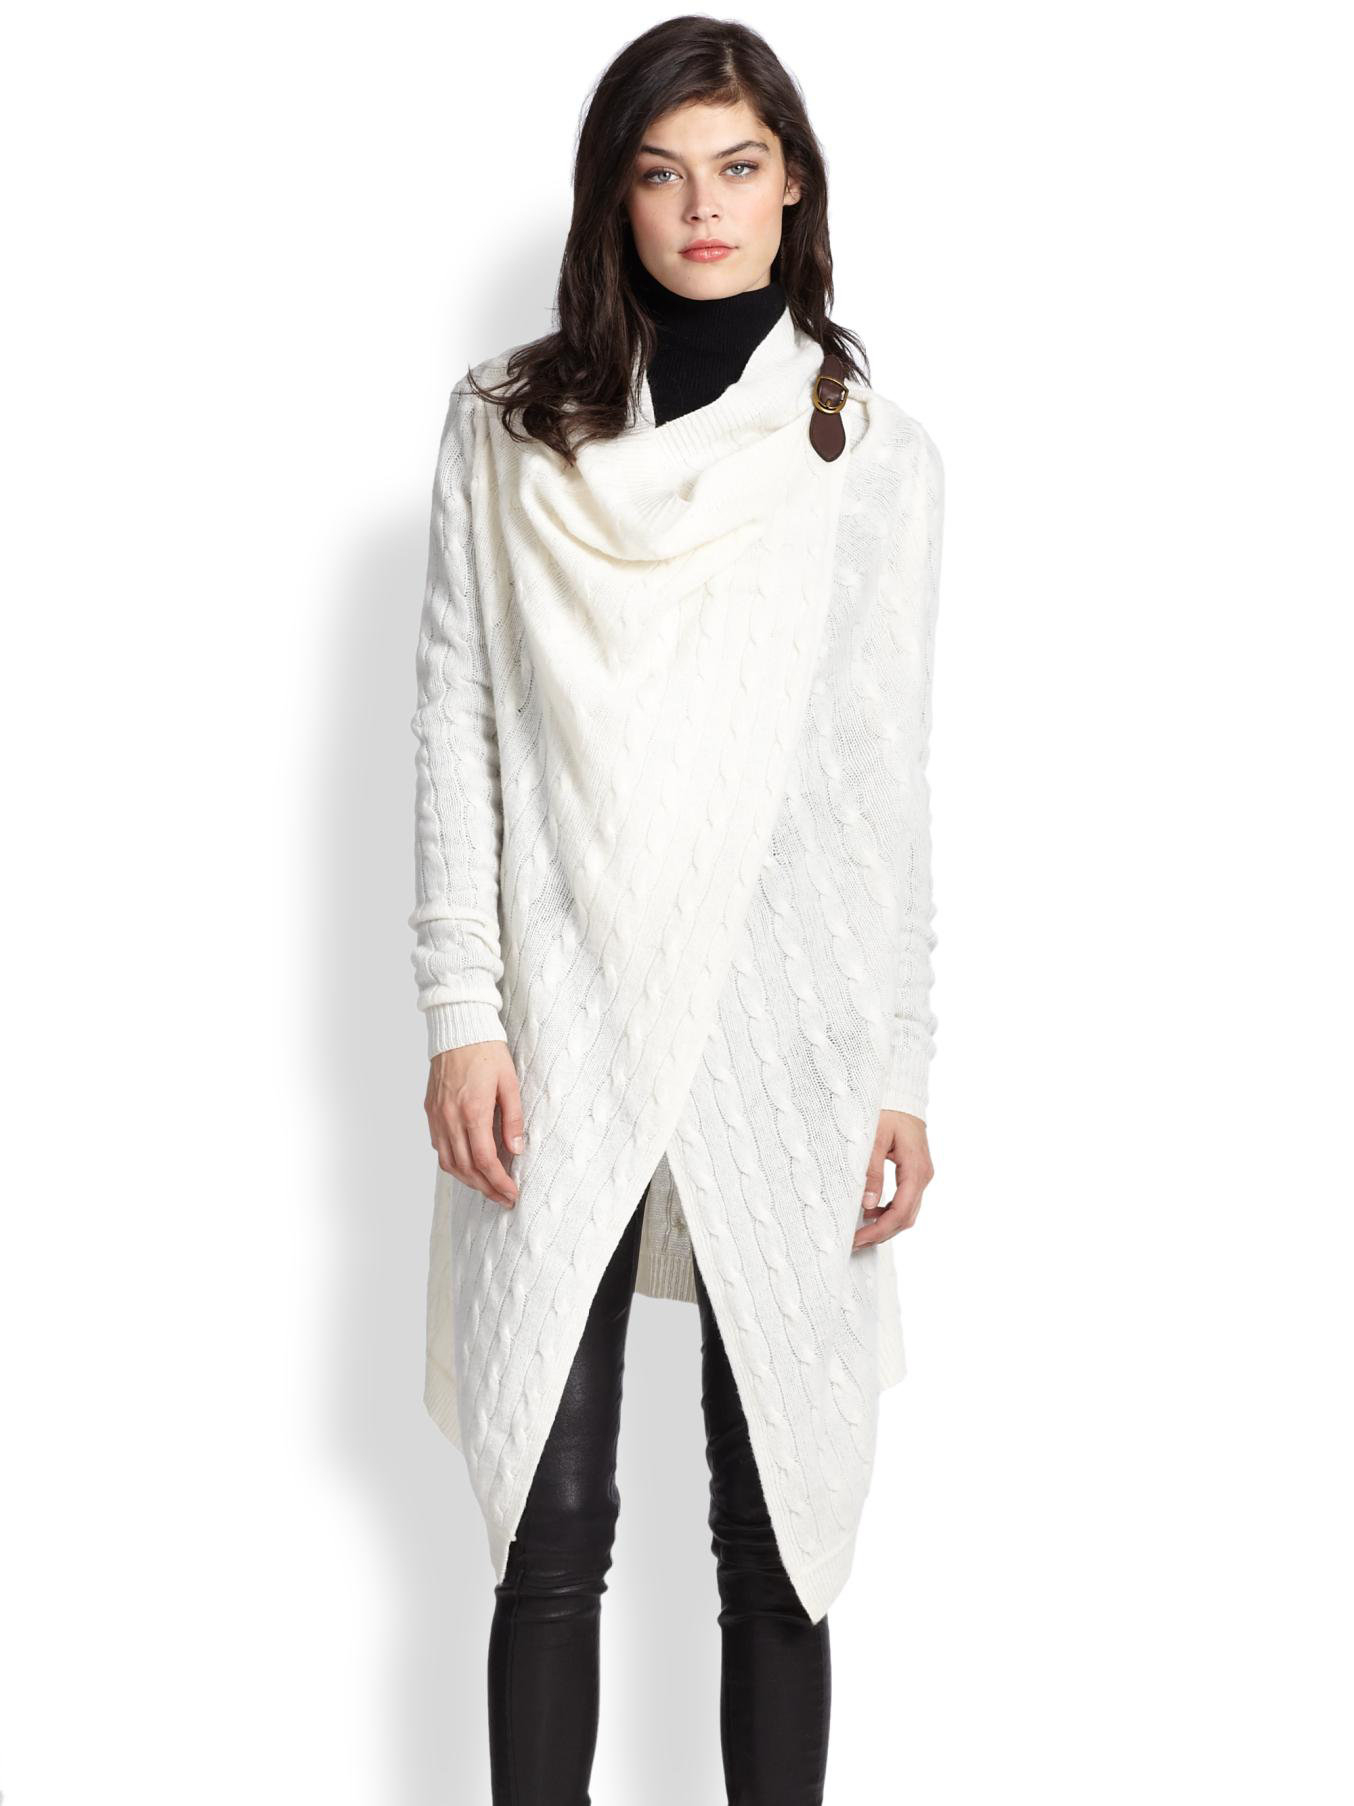 Polo Ralph Lauren Wool & Cashmere Wrap Sweater in Natural - Lyst